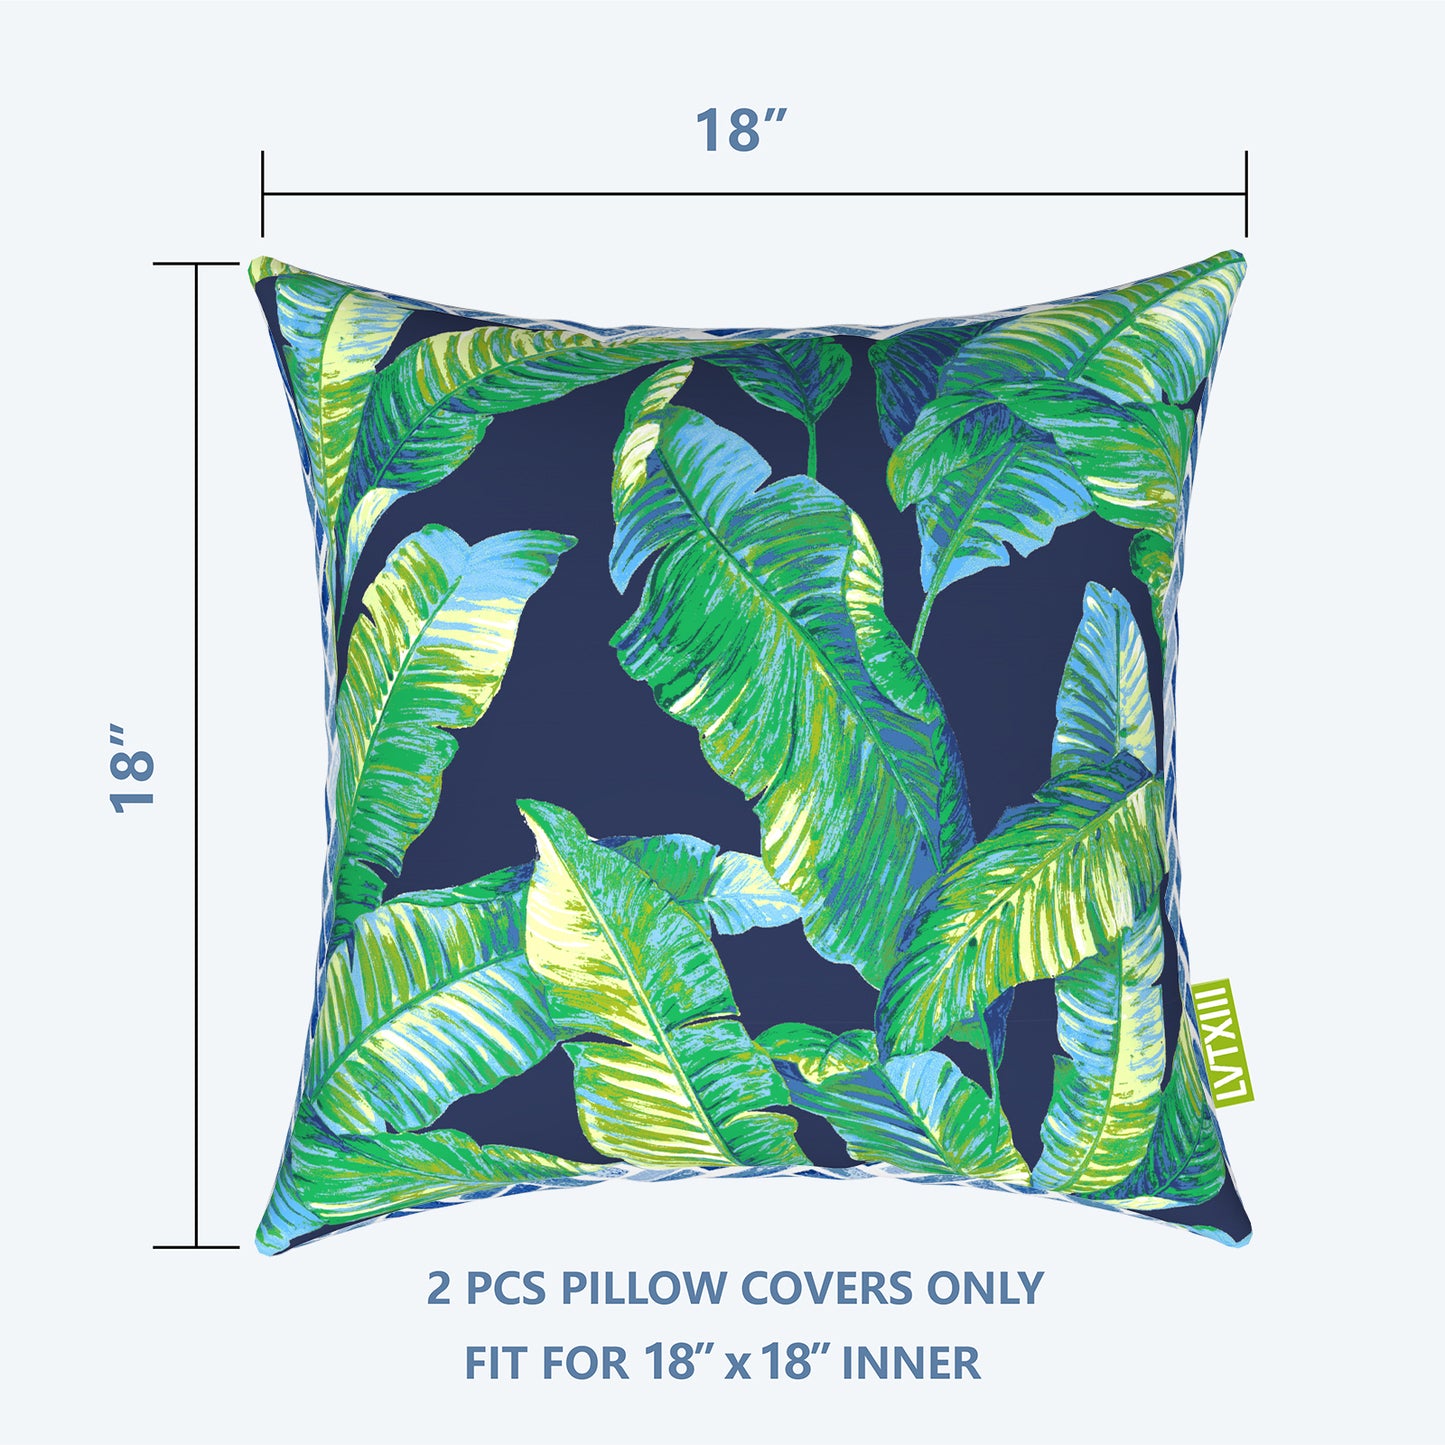 Melody Elephant Outdoor Throw Pillow Covers Pack of 2, Decorative Water Repellent Square Pillow Cases 18x18 Inch, Patio Pillowcases for Home Patio Furniture Use, Hanalei Lagoon